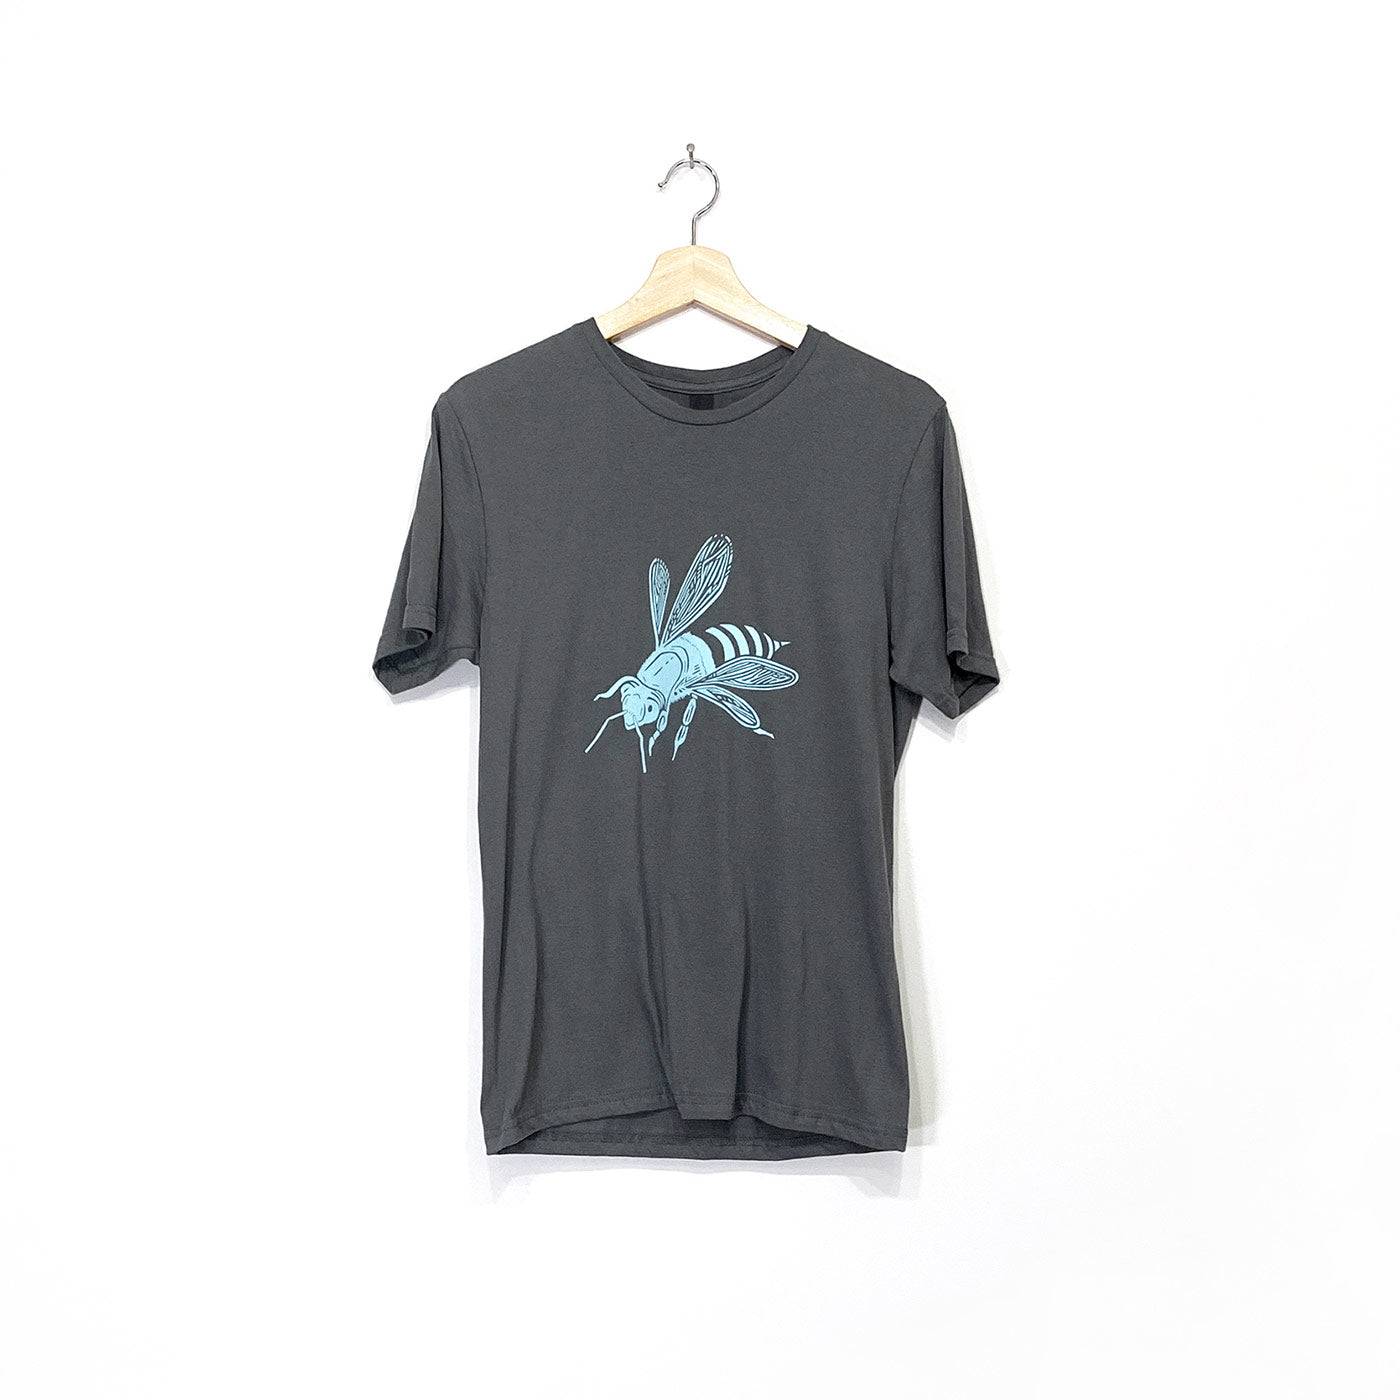 Charcoal grey crew neck short sleeved cotton t-shirt screen printed with a light blue bee illustration